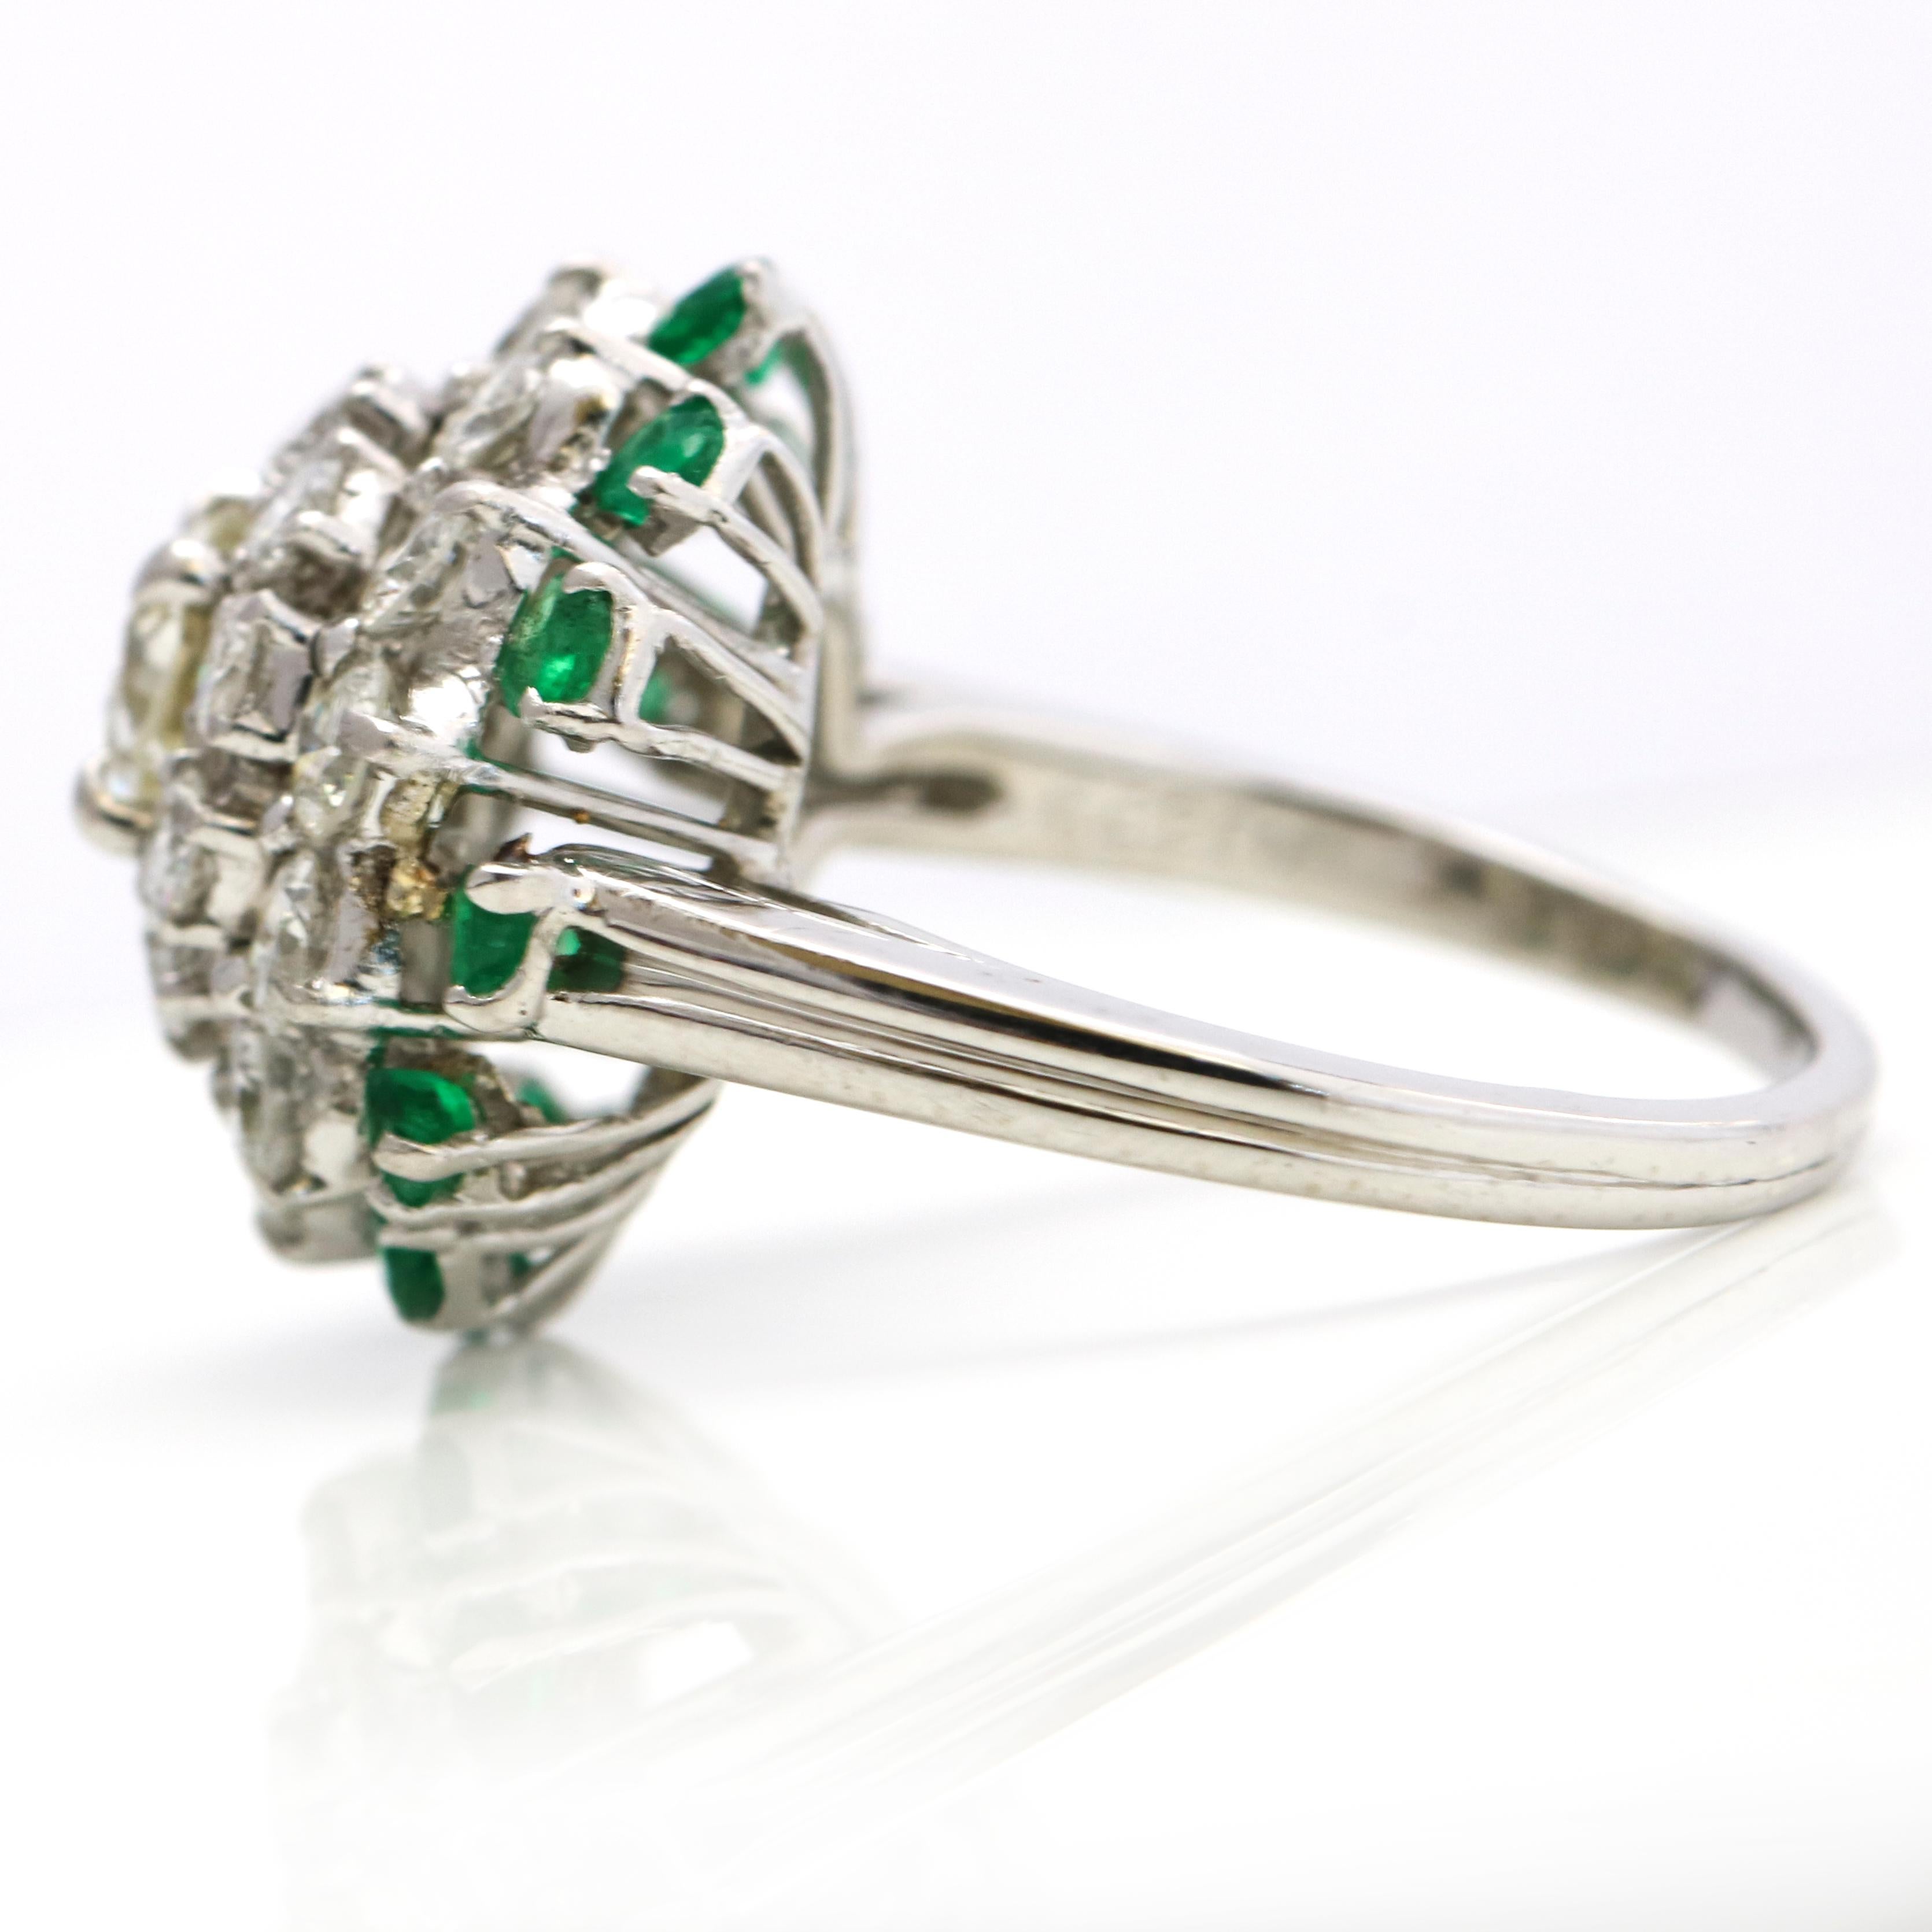 3.58 Carat Platinum Diamond Emerald Cluster Ring In Good Condition For Sale In Fort Lauderdale, FL